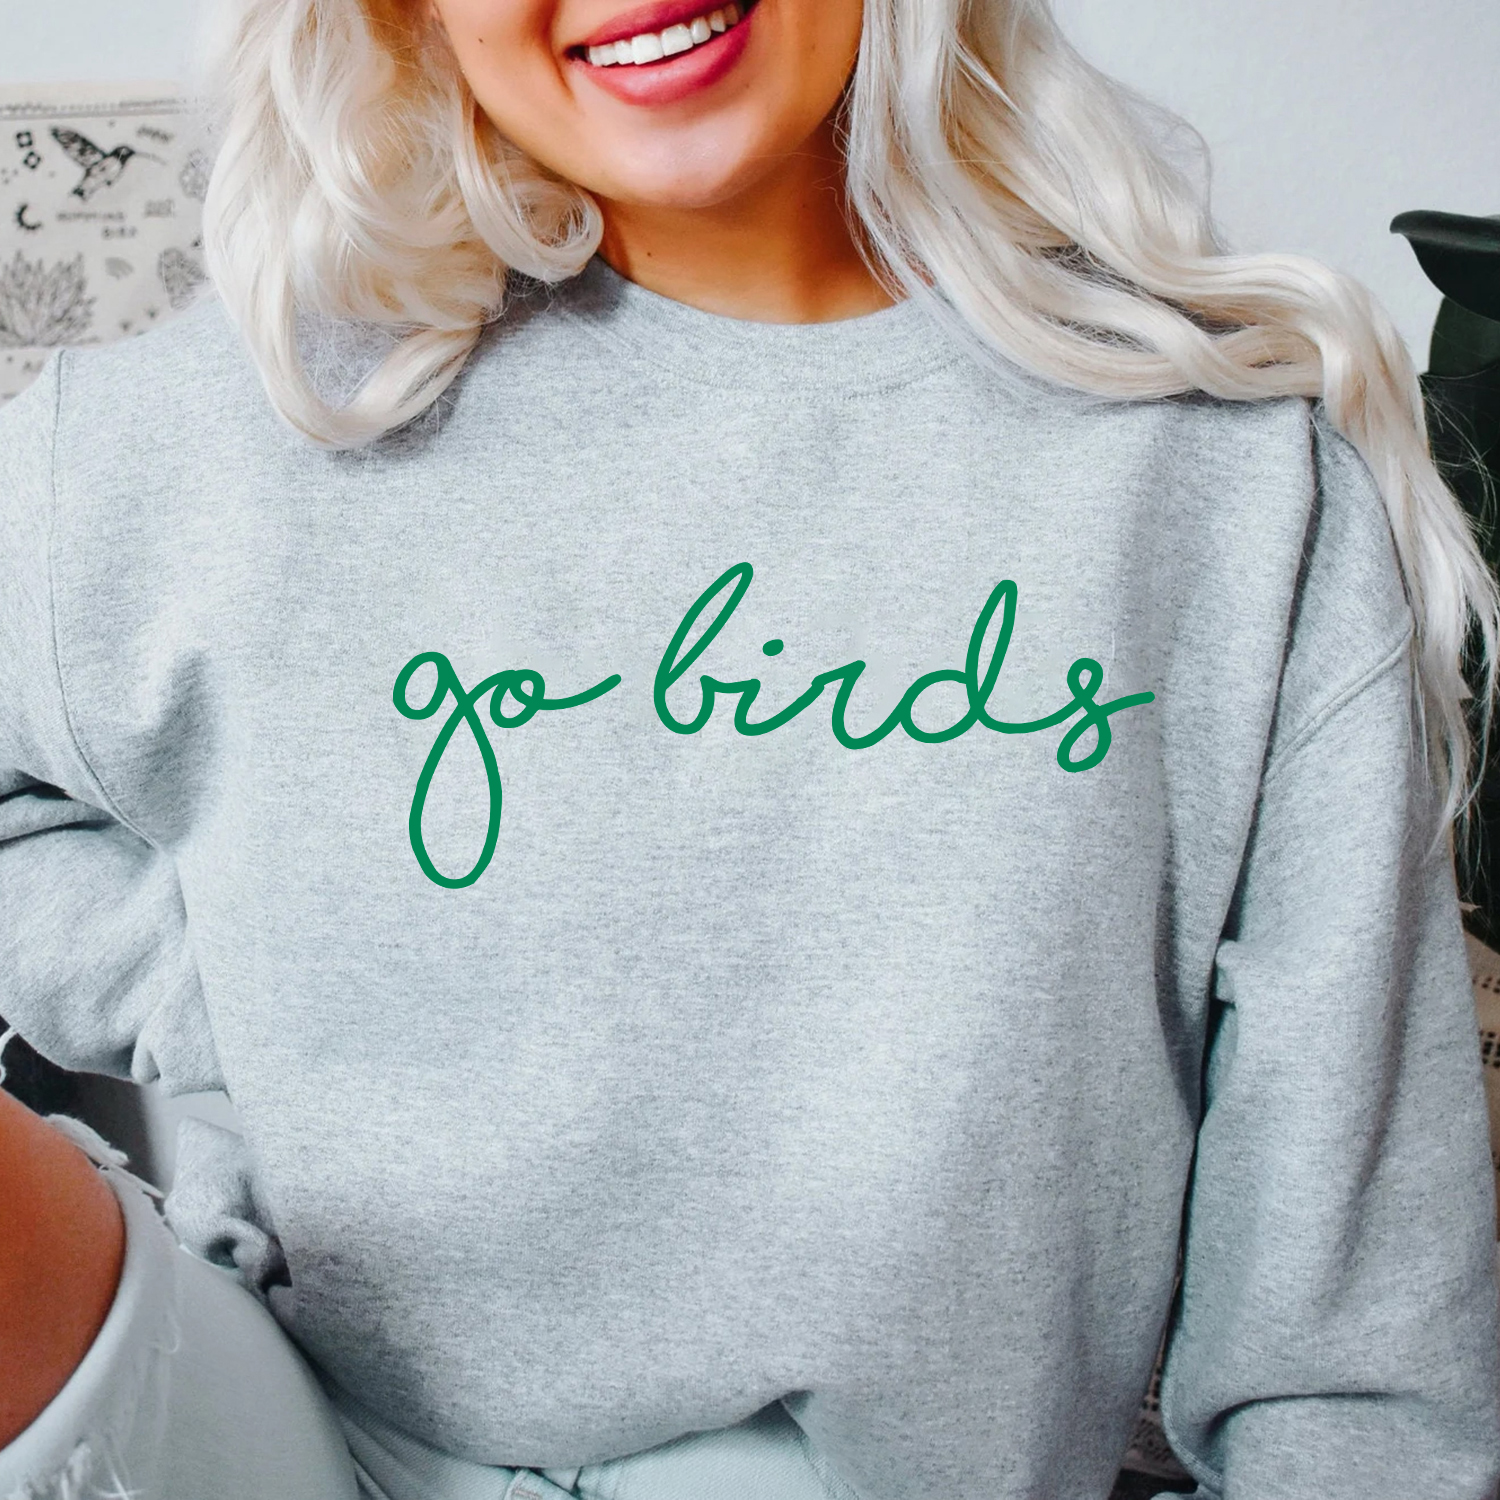 Funny Philadelphia Eagles Shirts, Go Birds Sweatshirt, Gifts For Eagles  Fans - Happy Place for Music Lovers